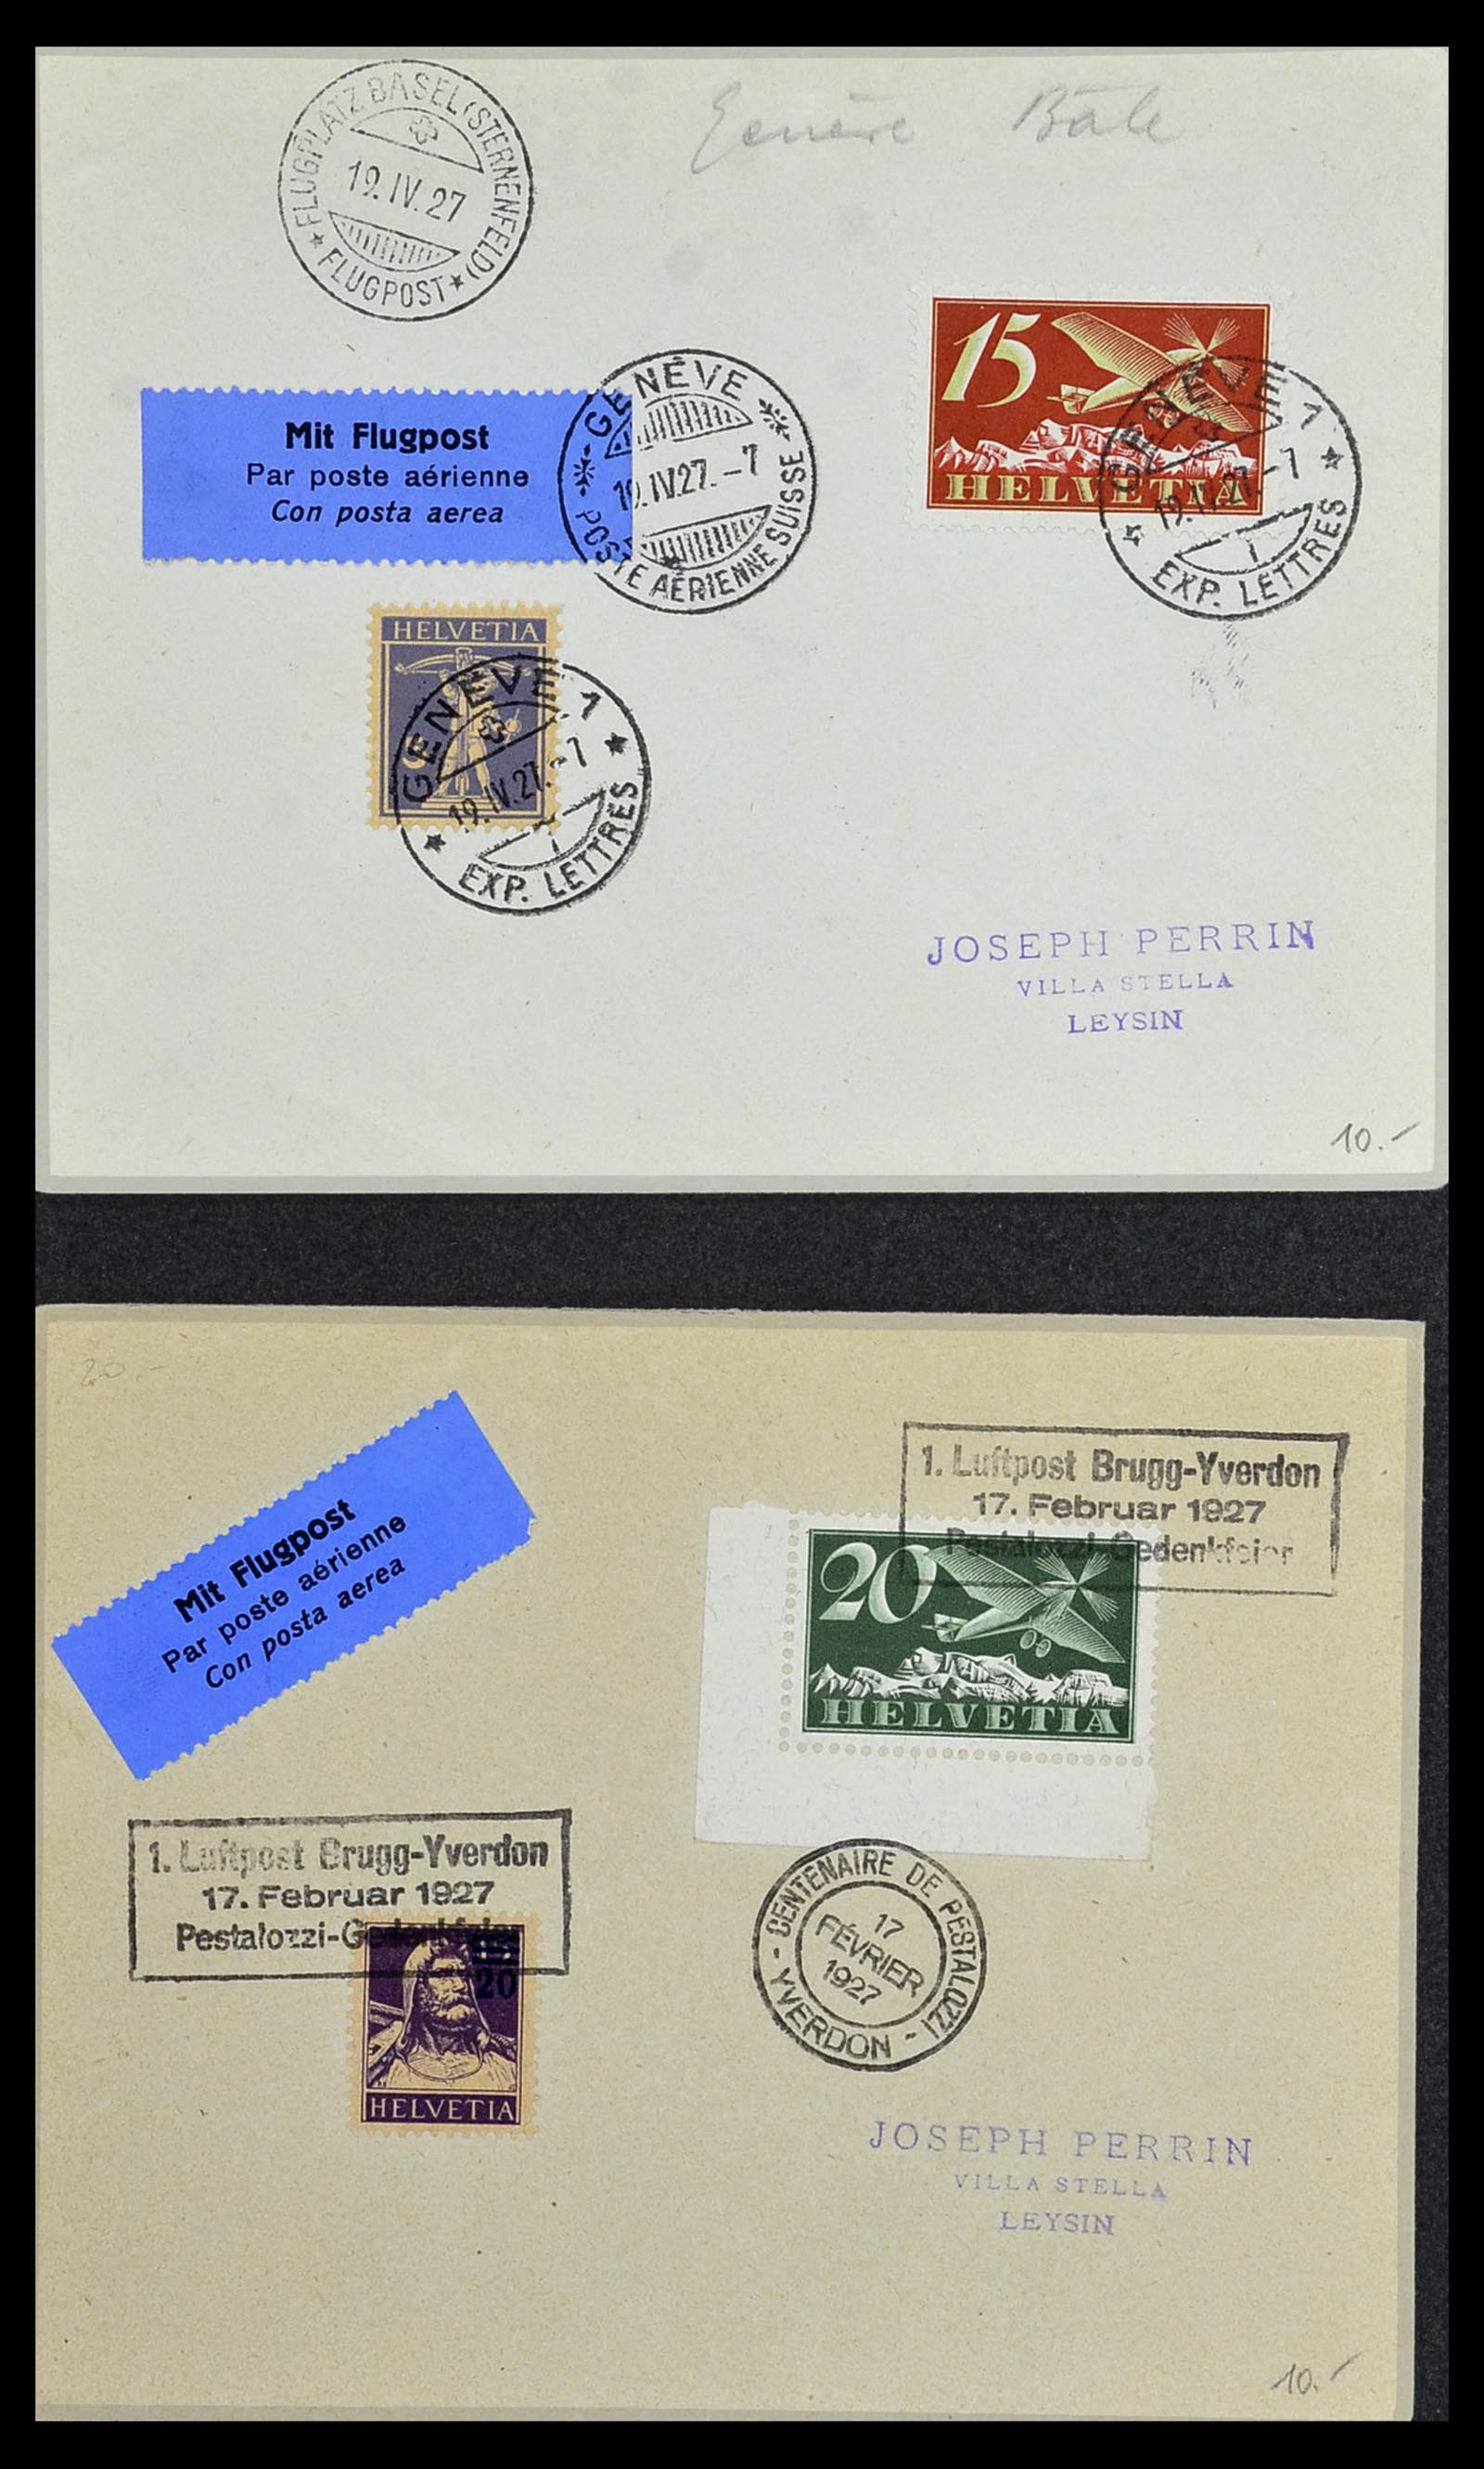 34141 107 - Stamp collection 34141 Switzerland airmail covers 1920-1960.